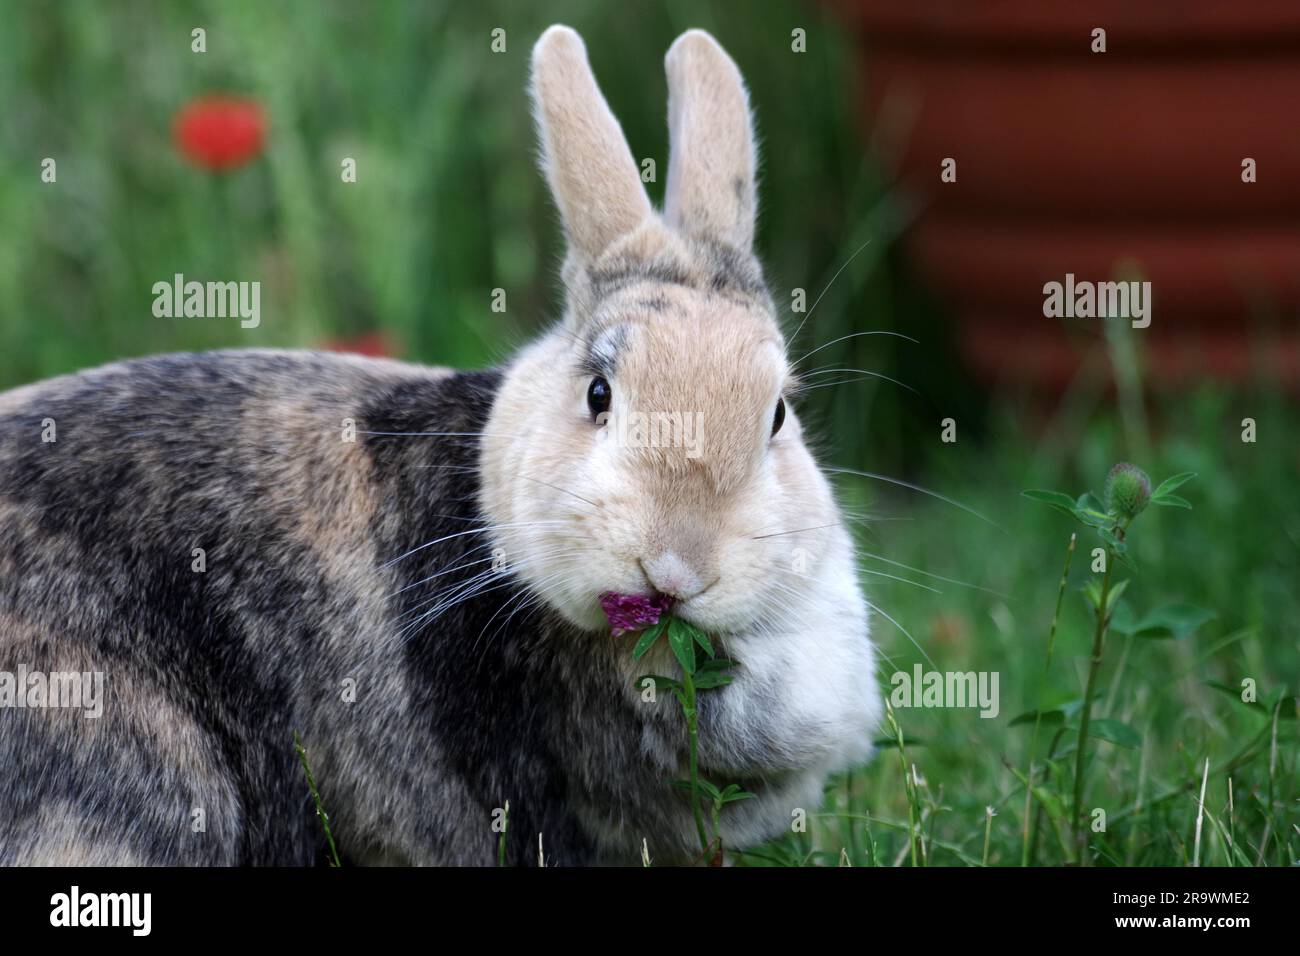 Domestic rabbit (Oryctolagus cuniculus forma domestica), rabbit, animal, close-up, red clover, eating, garden, A brown rabbit sits on the lawn eating Stock Photo